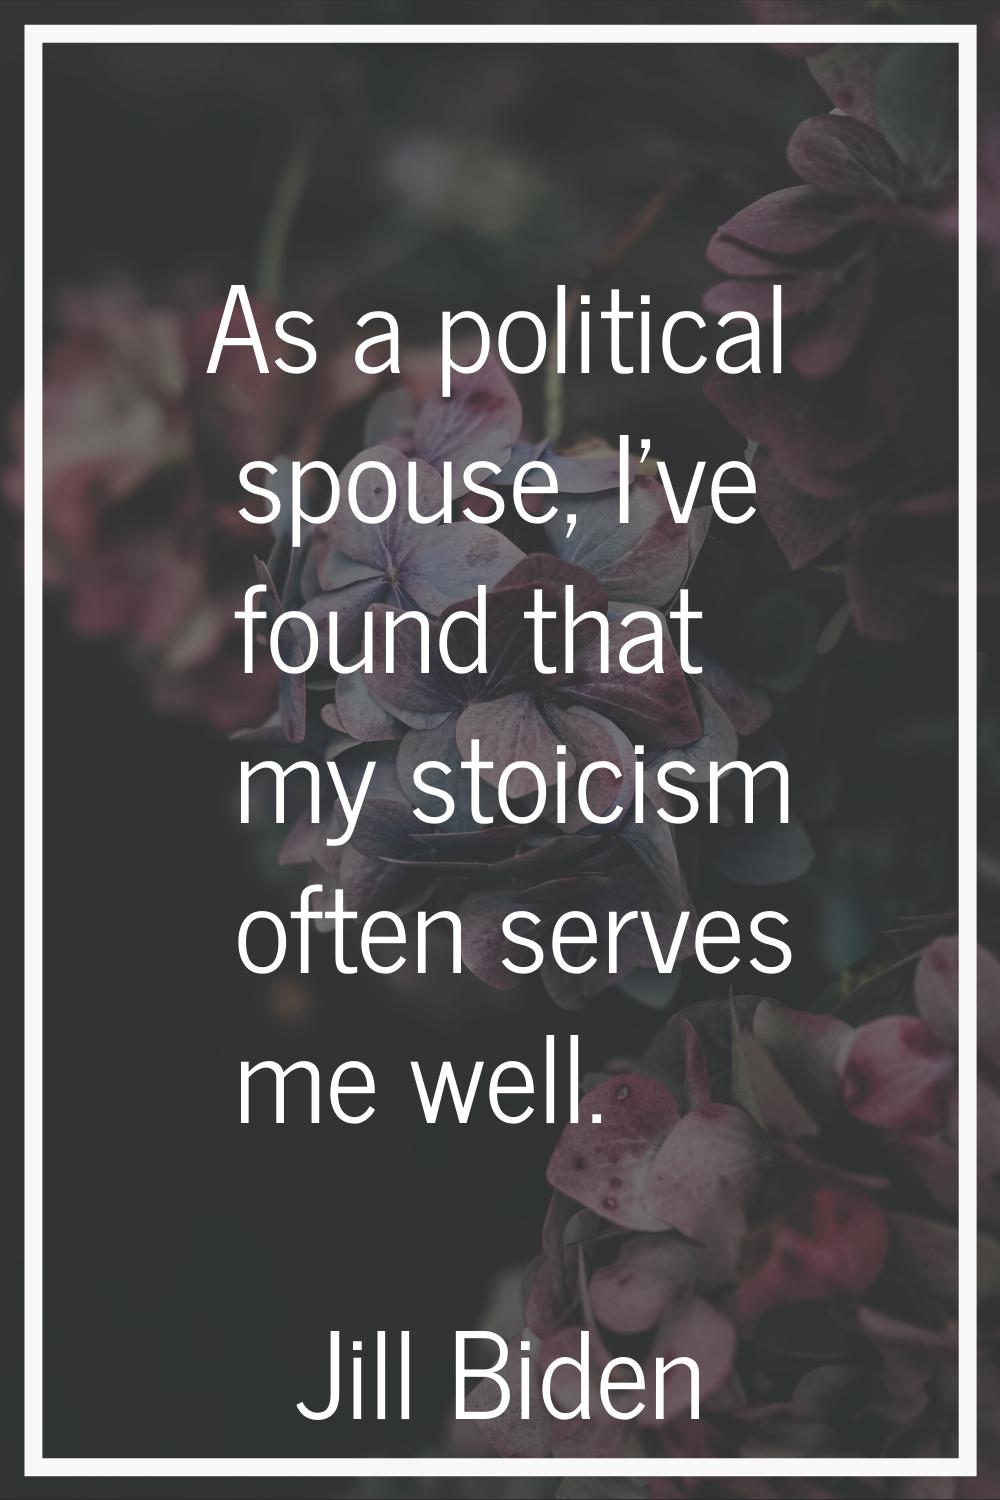 As a political spouse, I've found that my stoicism often serves me well.